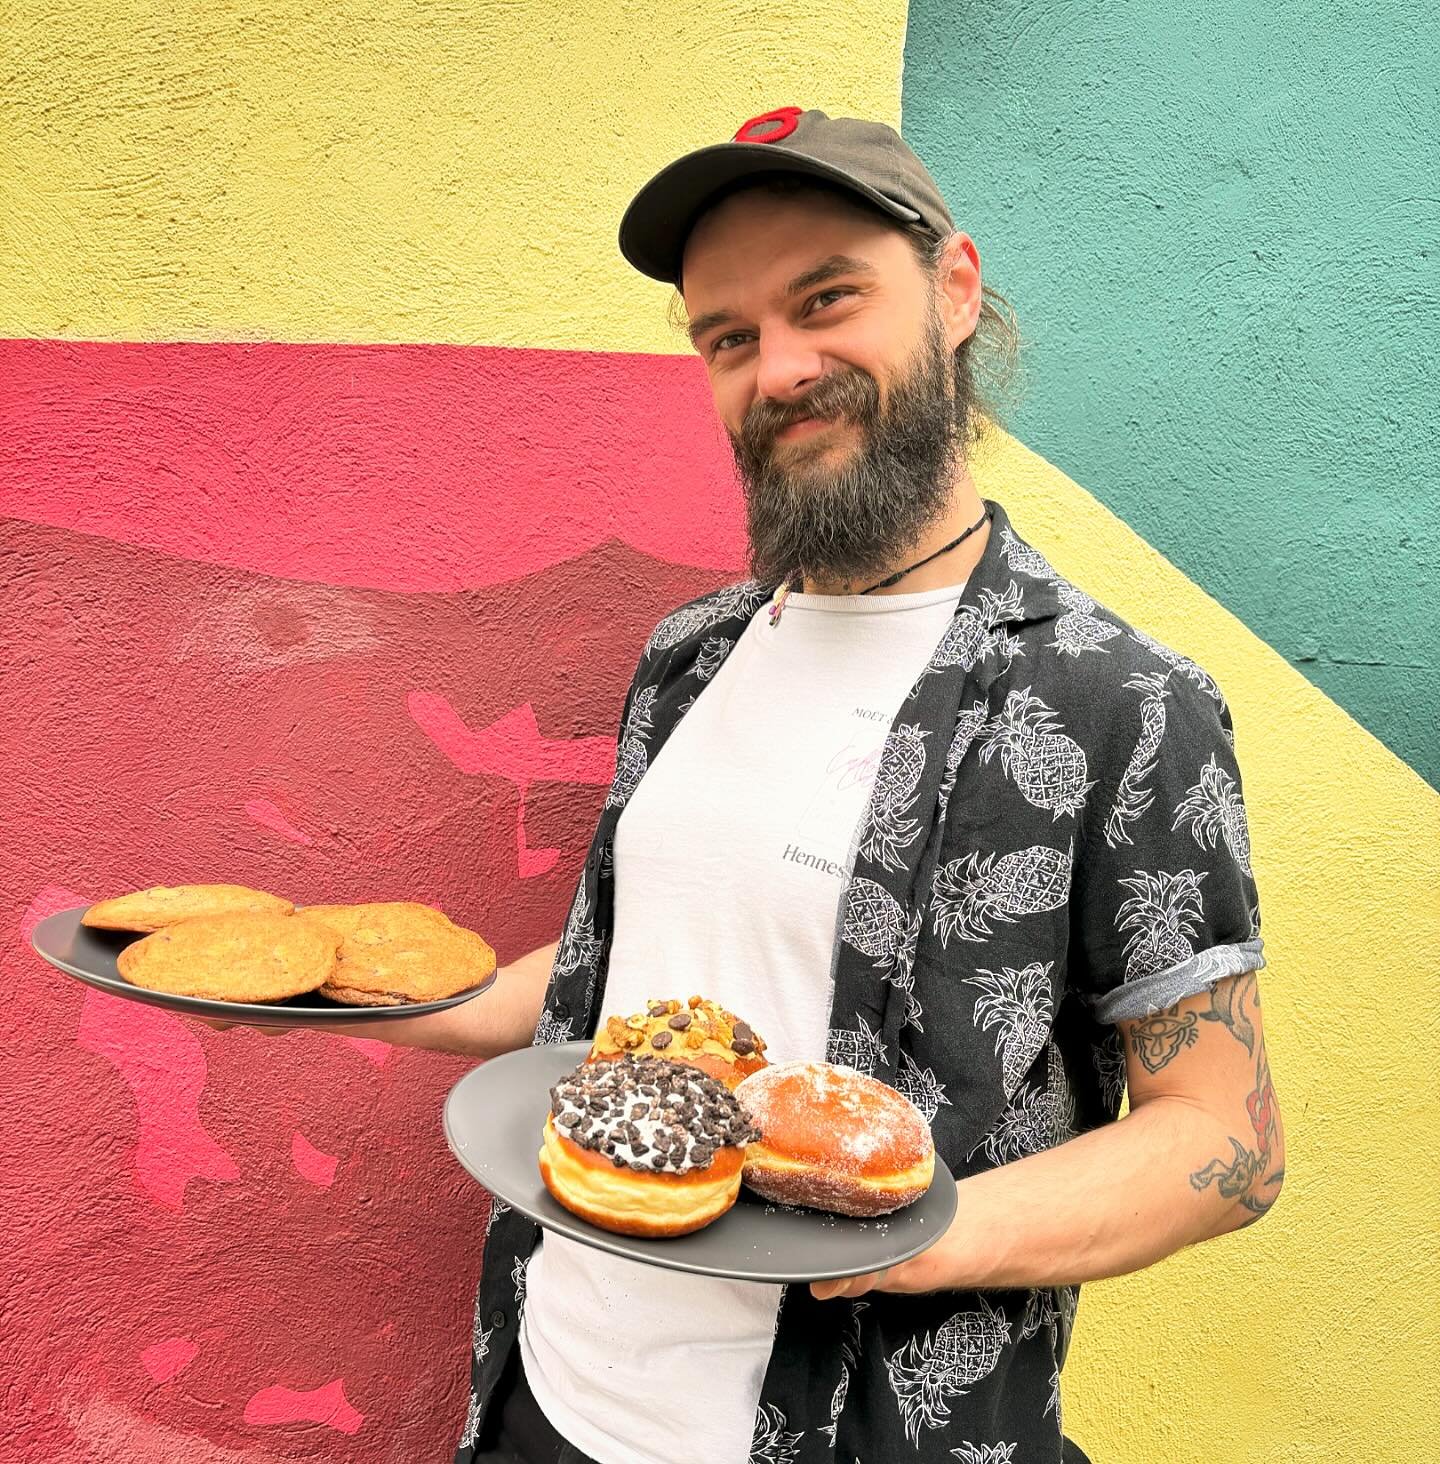 Hiiiiiii, happy bank holiday Sunday! 

We have SO MANY donuts today, and they look bloody delicious. 

Don&rsquo;t leave it to us staff to eat them all! 

Not only do we have donuts, but Phil and Daley have whipped up some rather tasty cookies! Come 